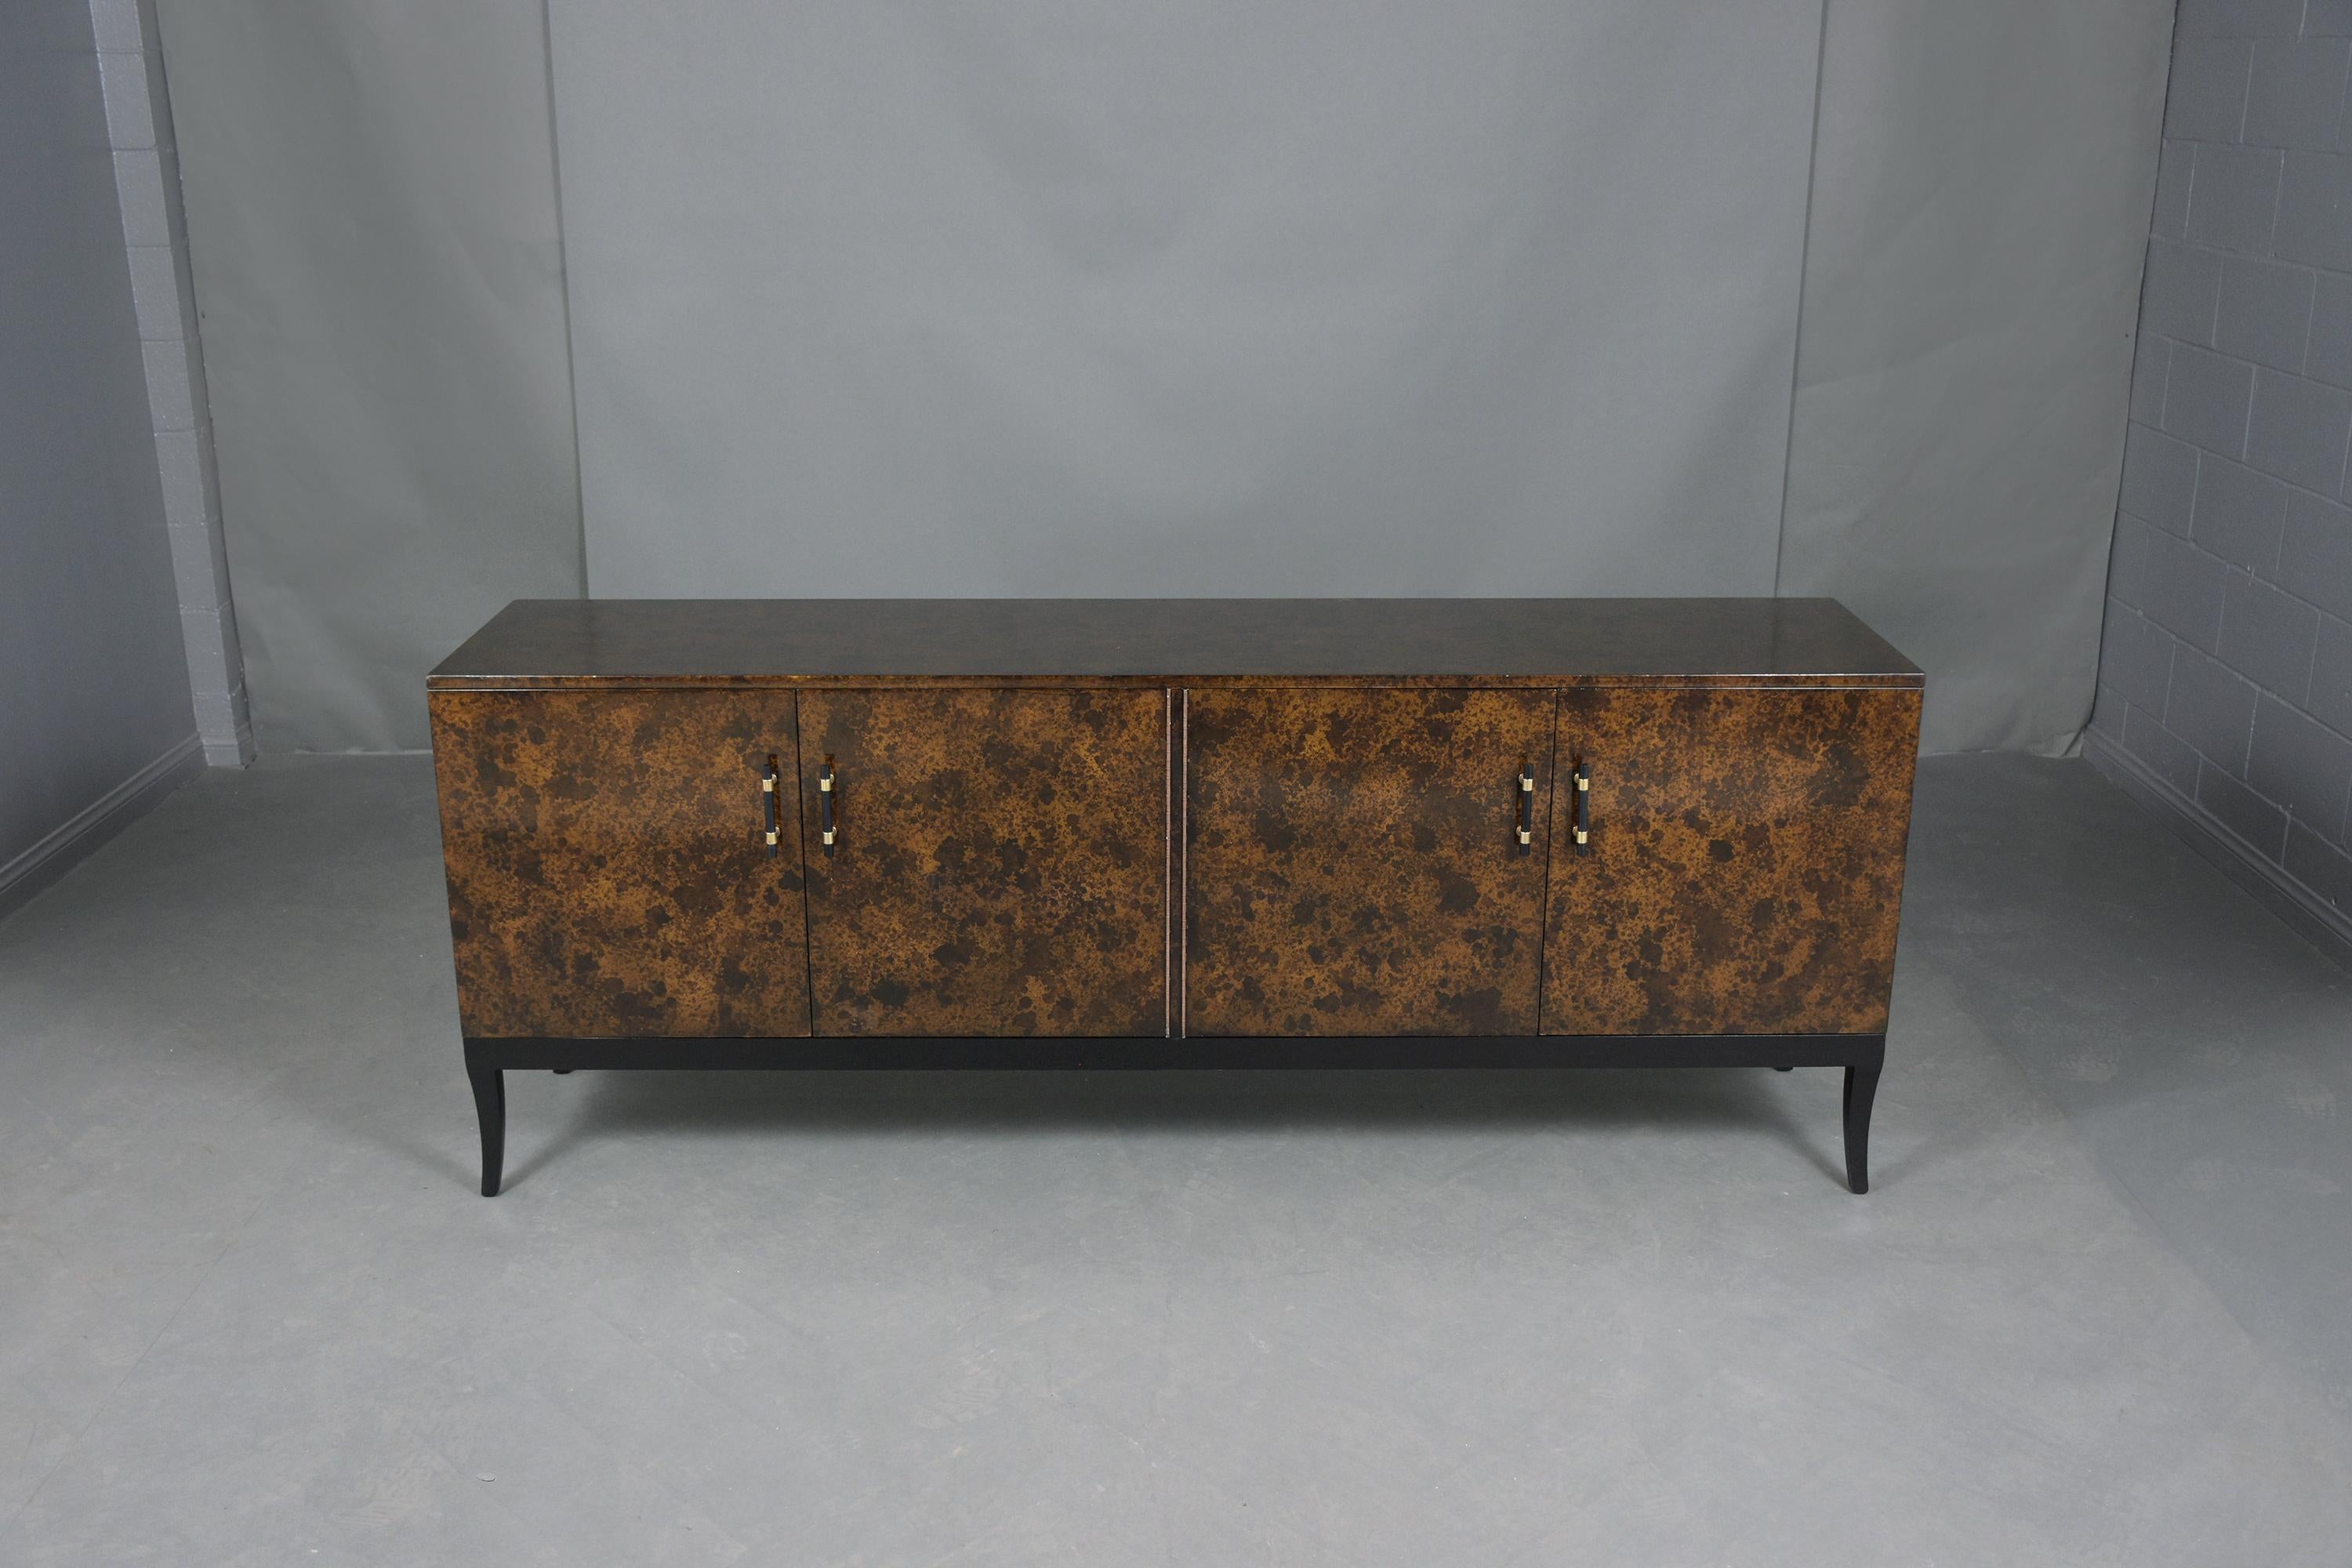 American Mid-Century Modern Directional Credenza